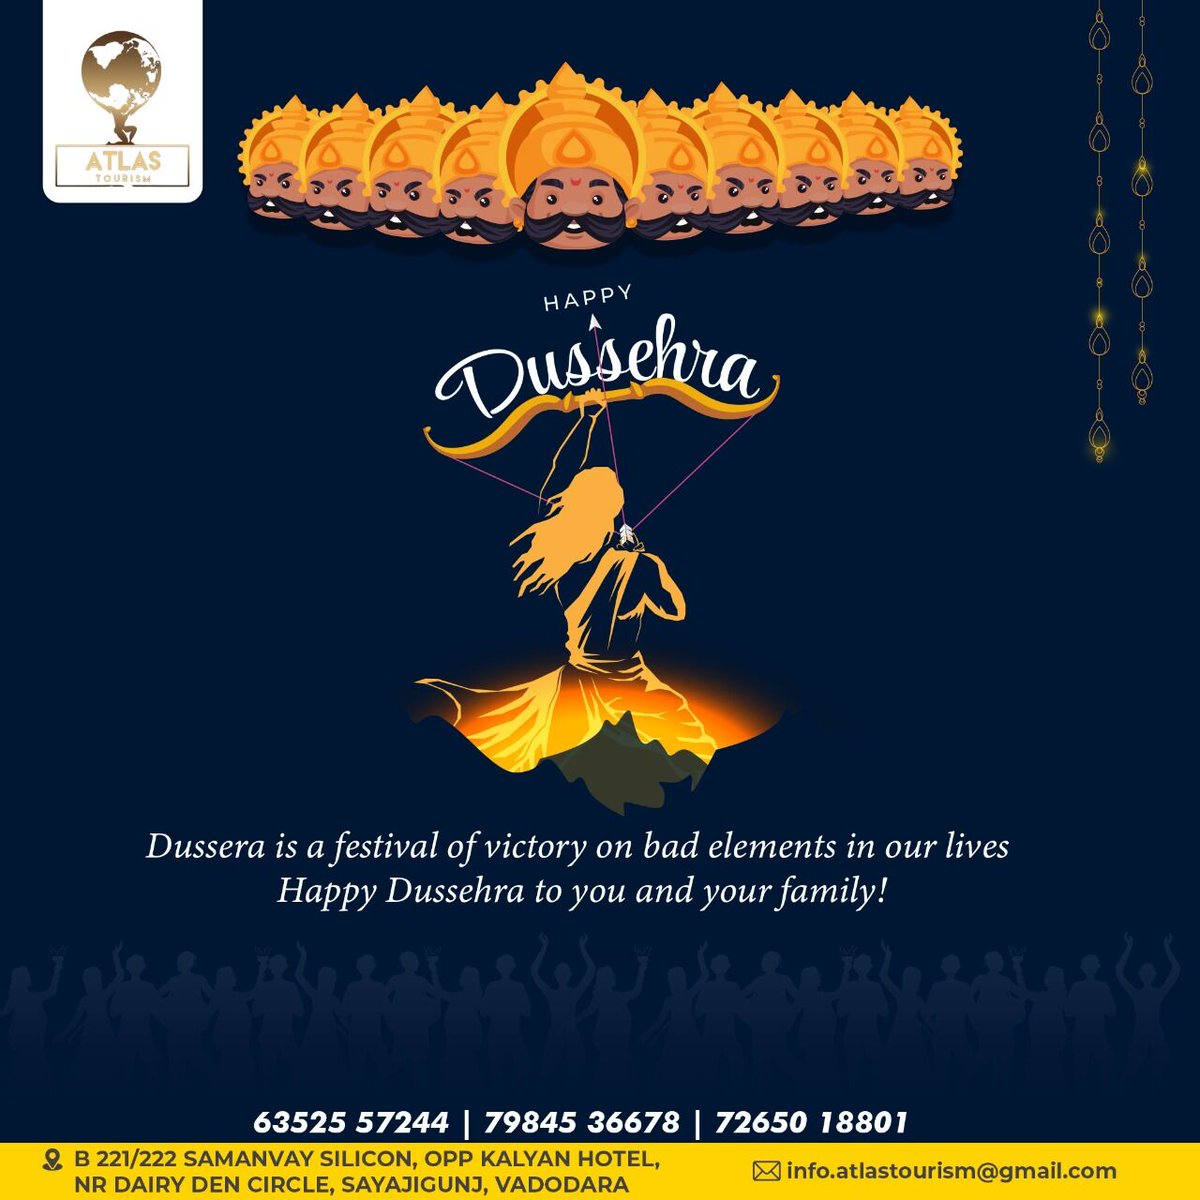 Open the doors and welcome all the positivity into your homes.

For All Your Tourism Plans Contact Us Today At:
📩info.atlastourism@gmail.com

#atlastourism #dussehra #happydussehra #positivity #positivevibes #goodvibes #prosperity #vijyadashmi🔥🔥🔥